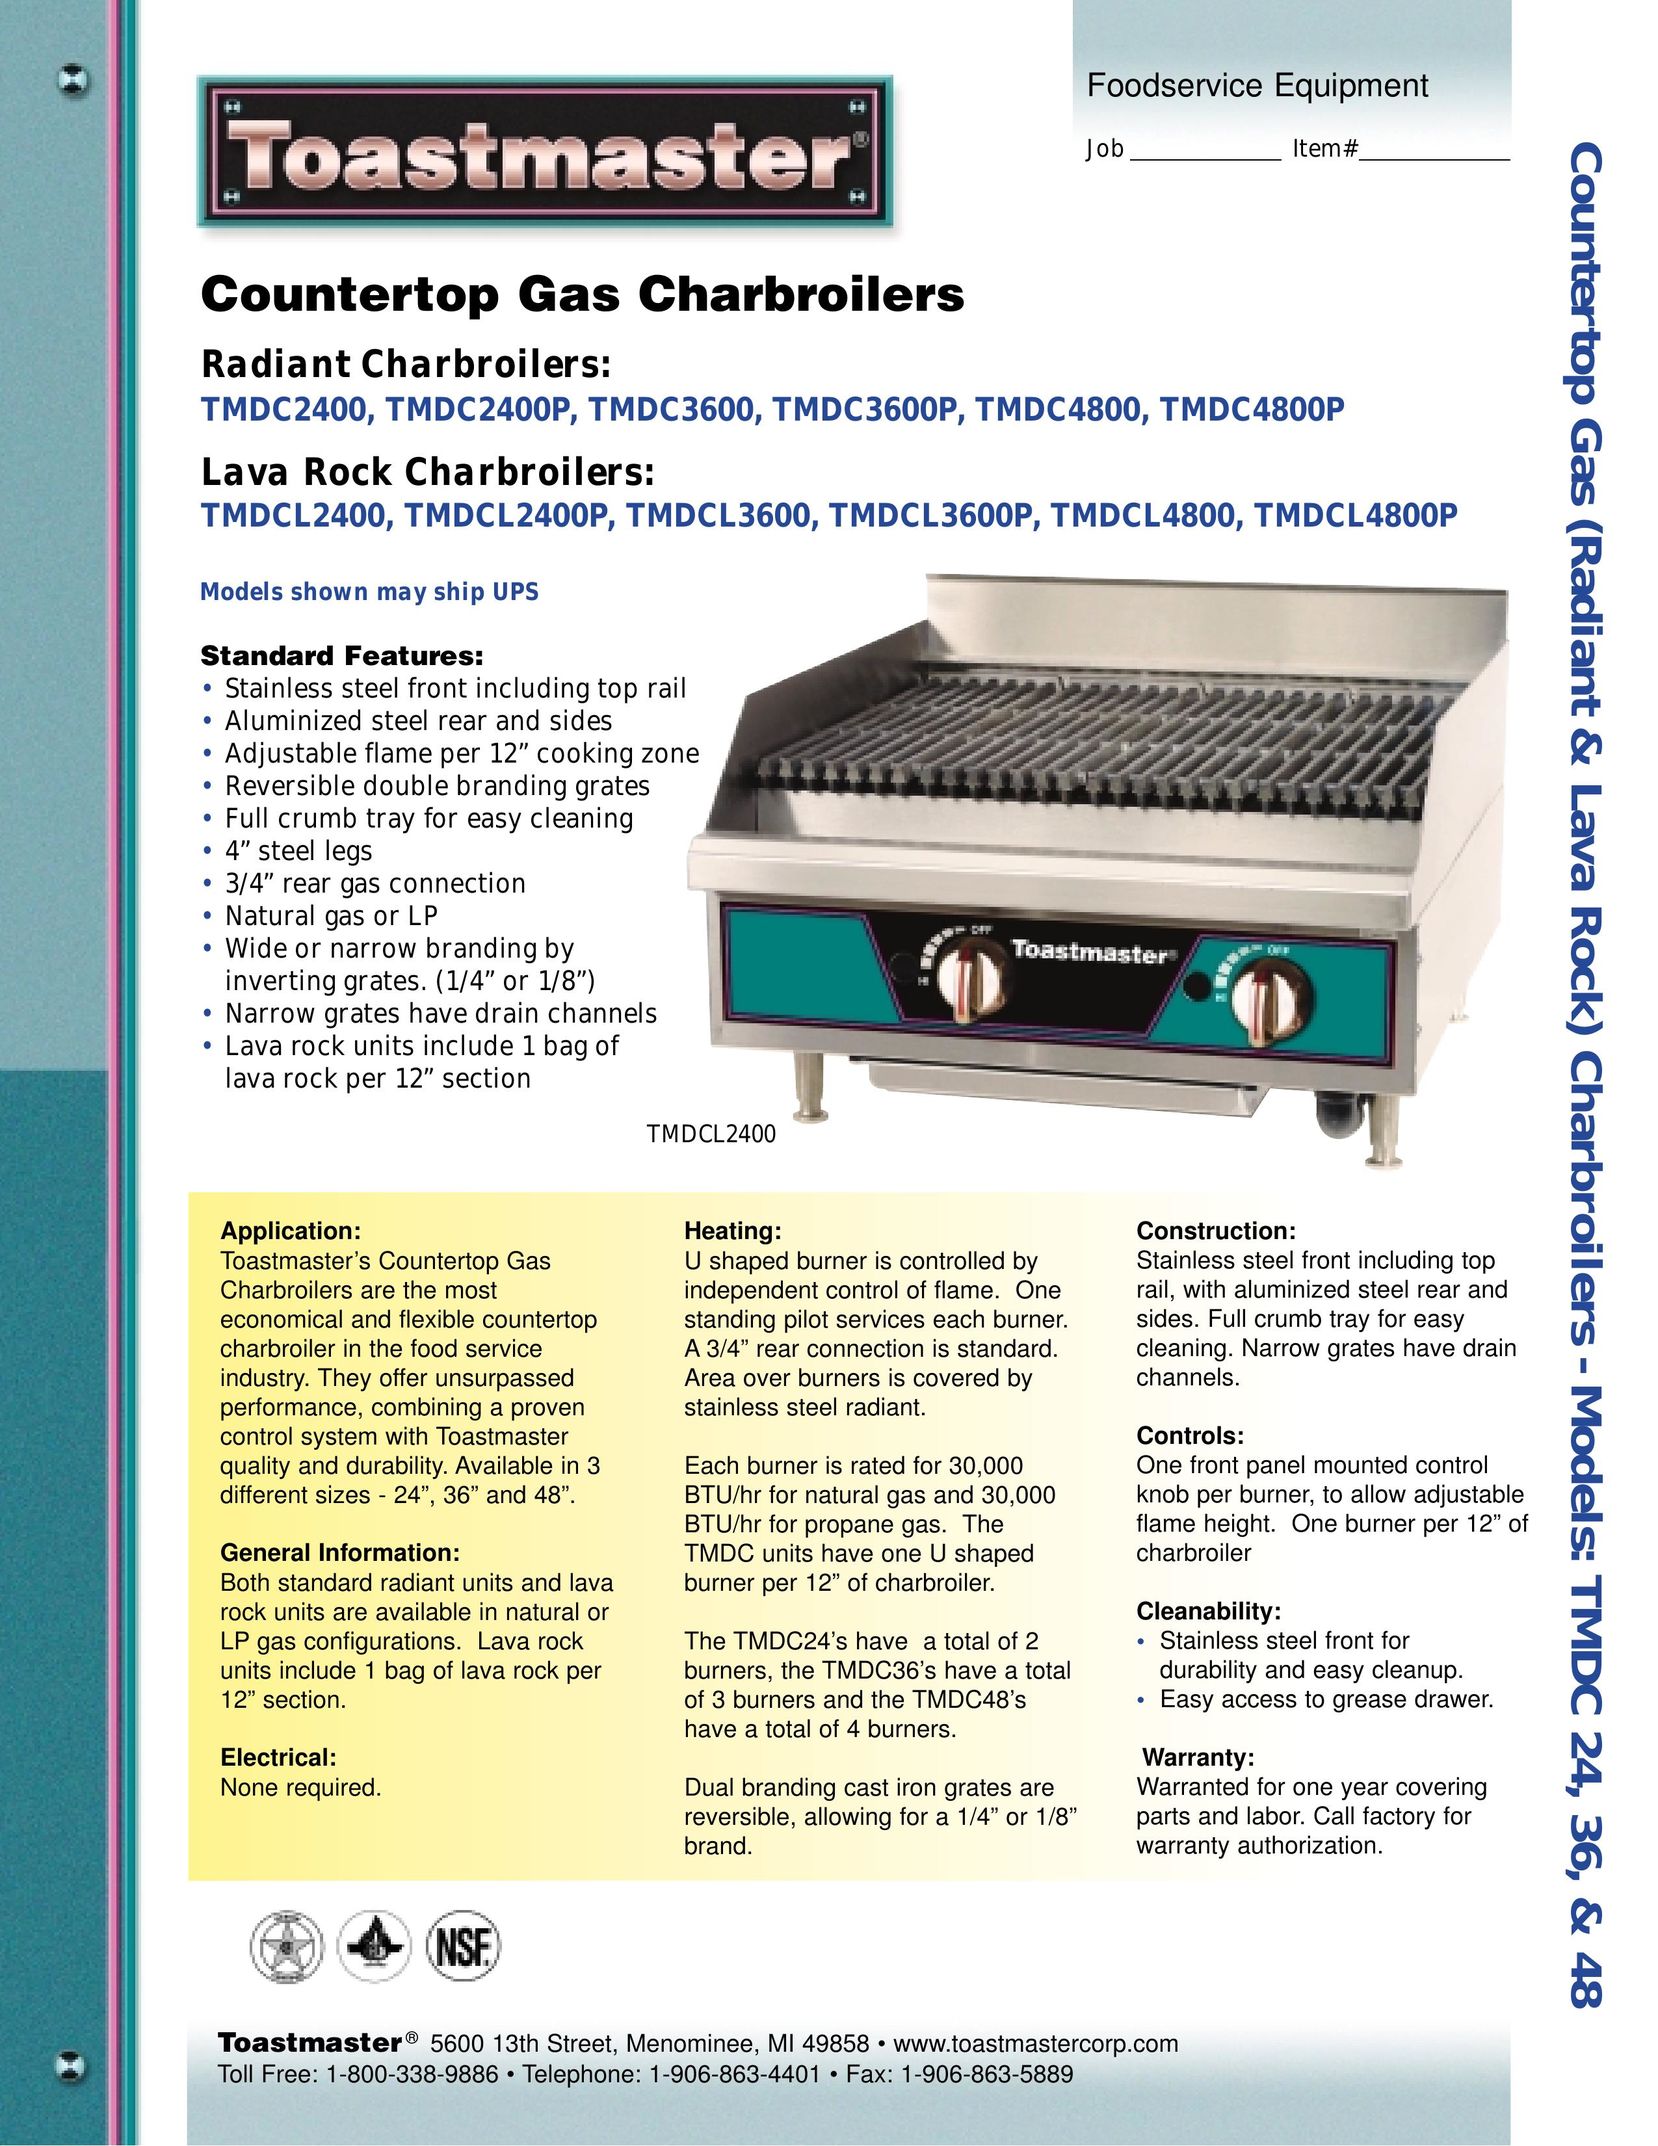 Toastmaster TMDCL2400 Oven User Manual